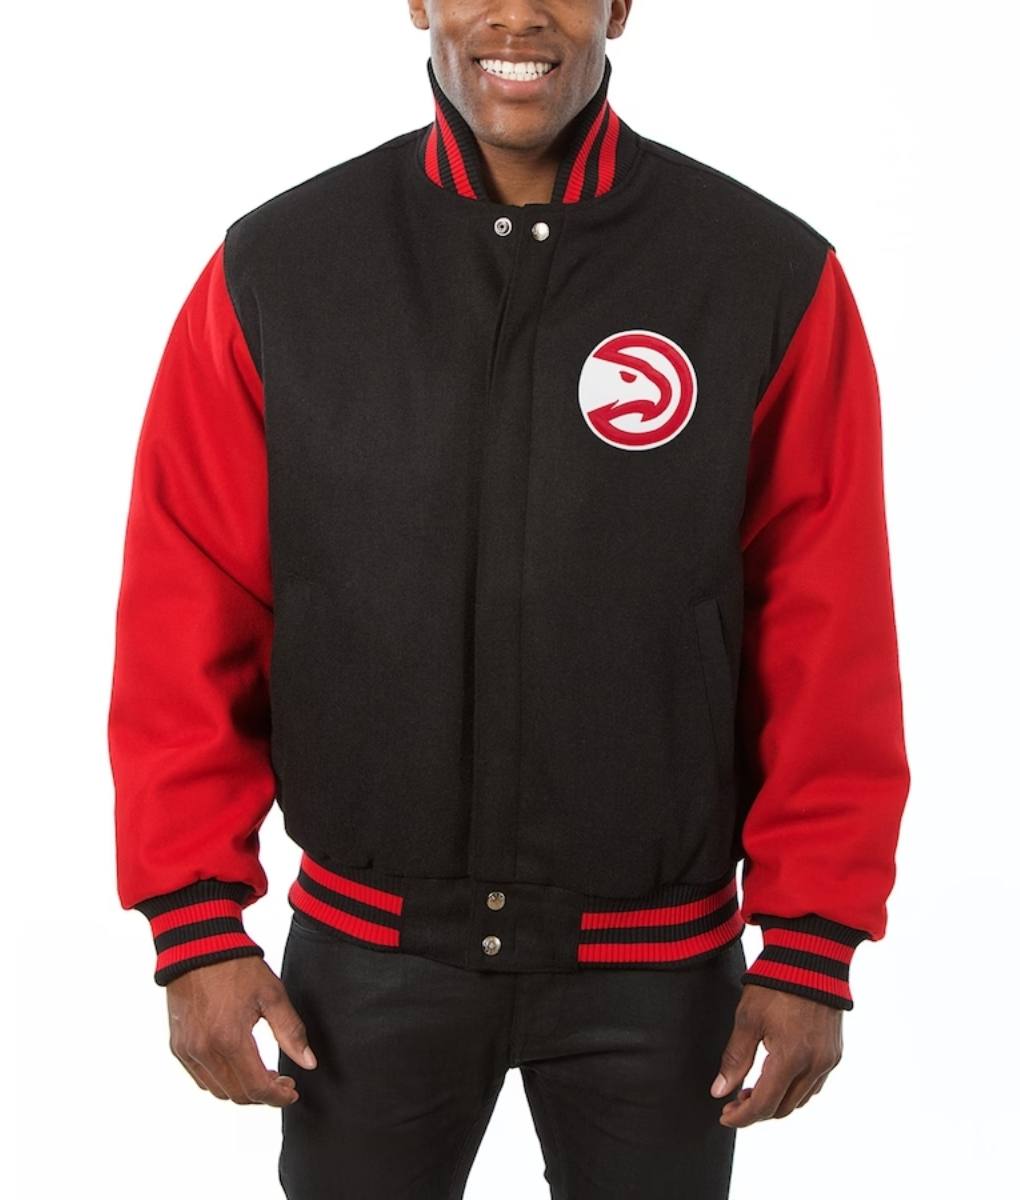 ATL Hawks Black and Red Jacket (1)